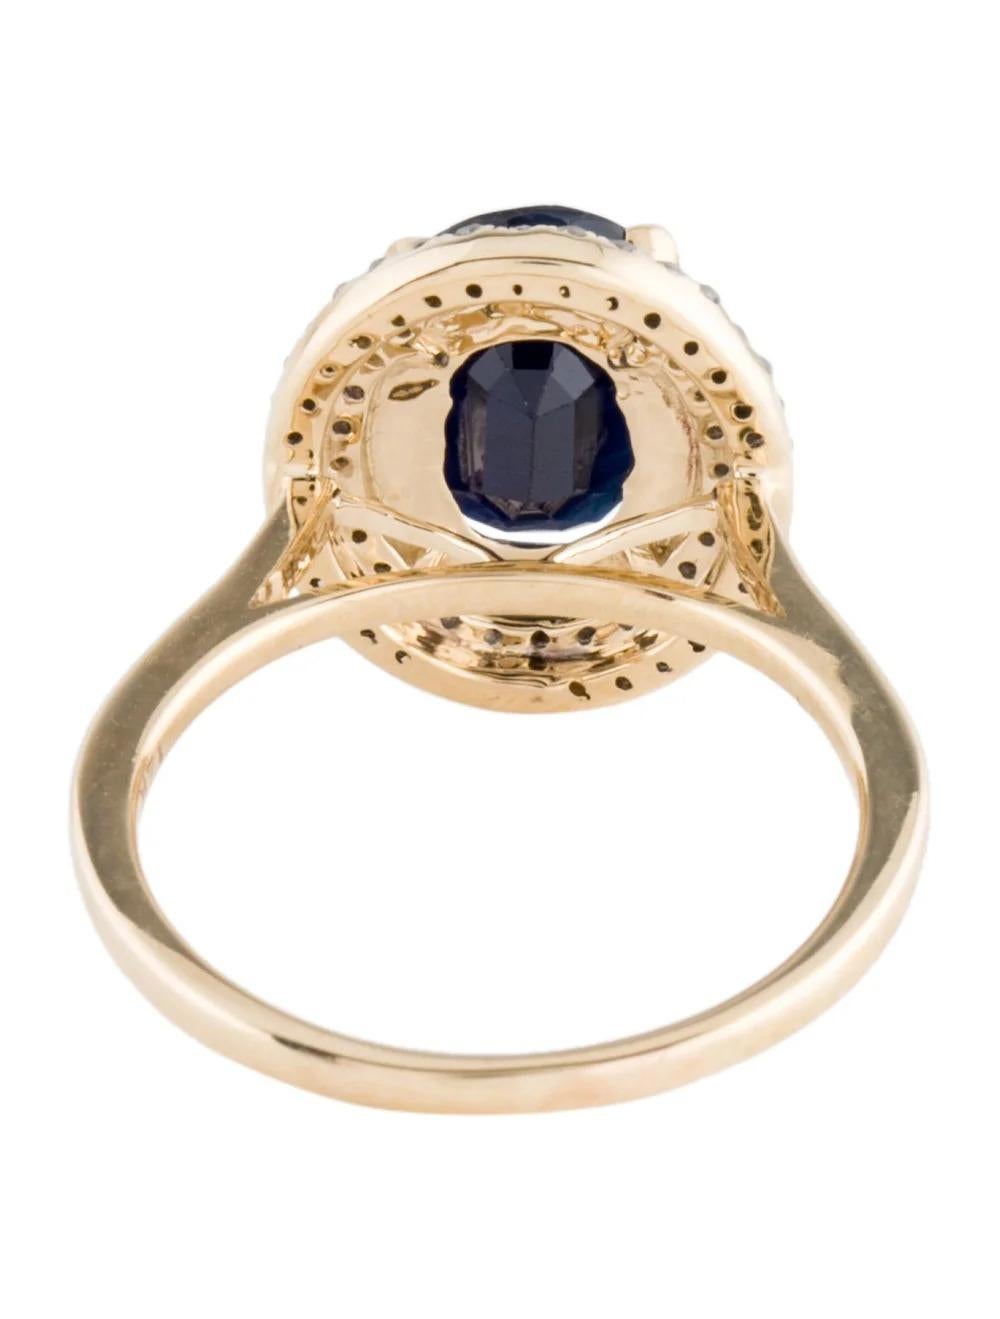 Vintage 14K 3.40ct Sapphire Diamond Halo Cocktail Ring Size 6.25 - Luxury Piece In New Condition For Sale In Holtsville, NY